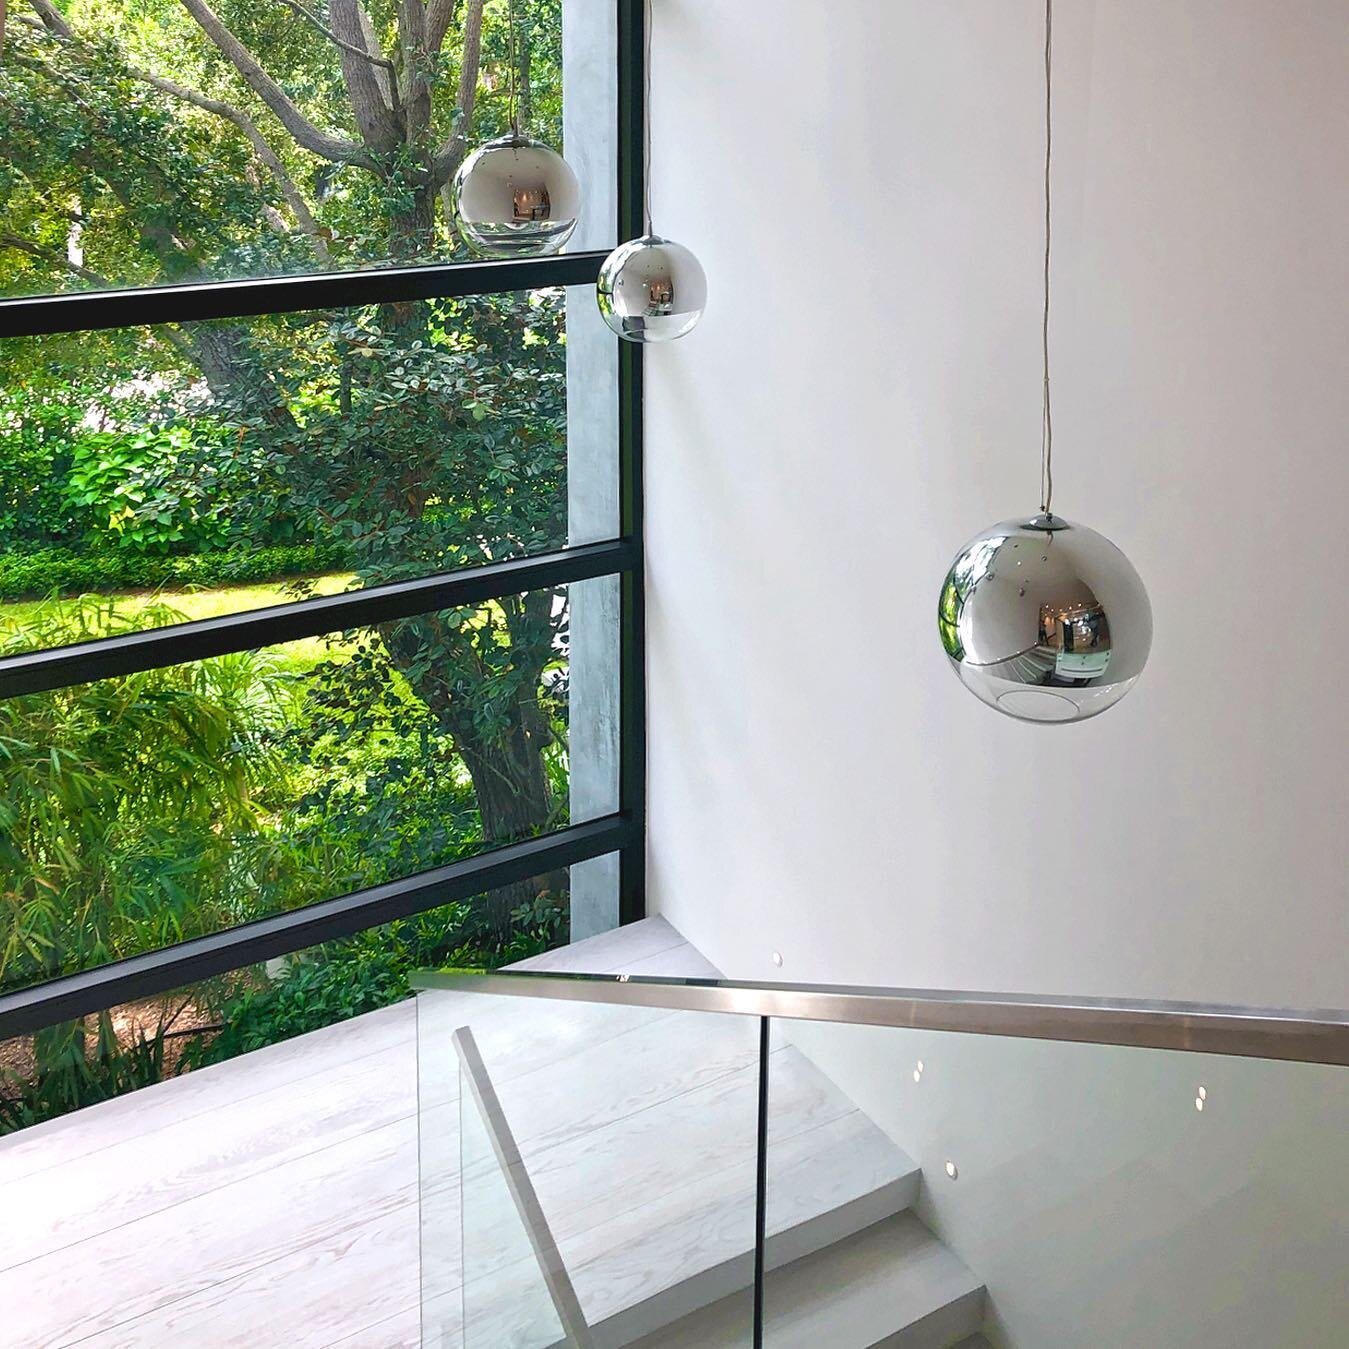 Floating stairs with floor to ceiling windows bringing in the vibrant landscape 🌳
 
#MichaelWolkInteriors #MichaelWolkDesign #WhenDesignMatters #miamirenovation #staircasemakeover #southfloridainteriordesigner #staircaserenovation #southfloridahomes